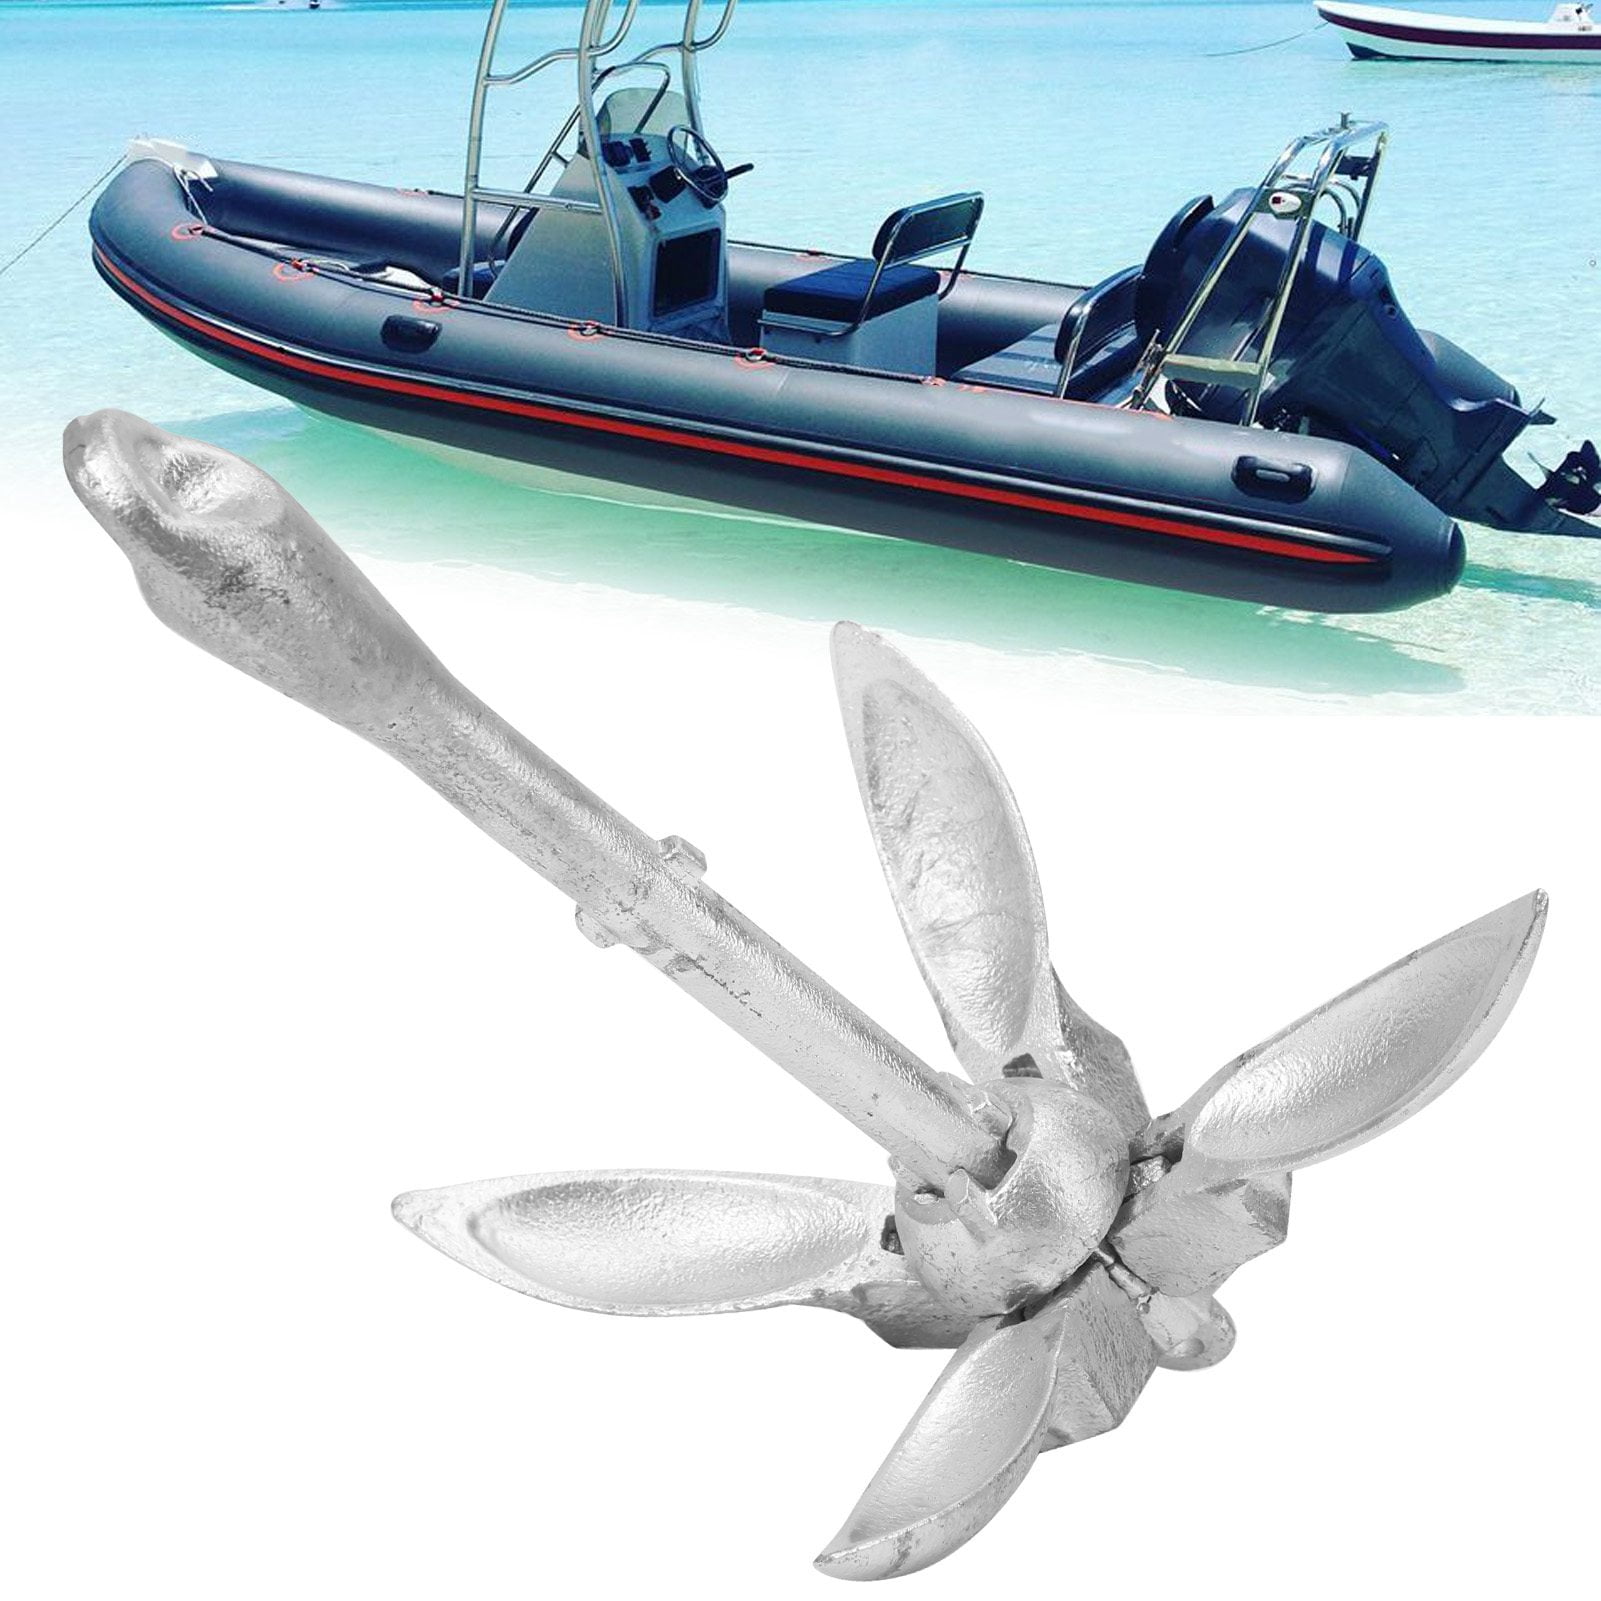 VGEBY Kayak Inflatable Fishing Boat Anchor Anchor Tie Off Patch for Kayaking Inflatable Dinghy Bracket Accessories Outdoor Supplies